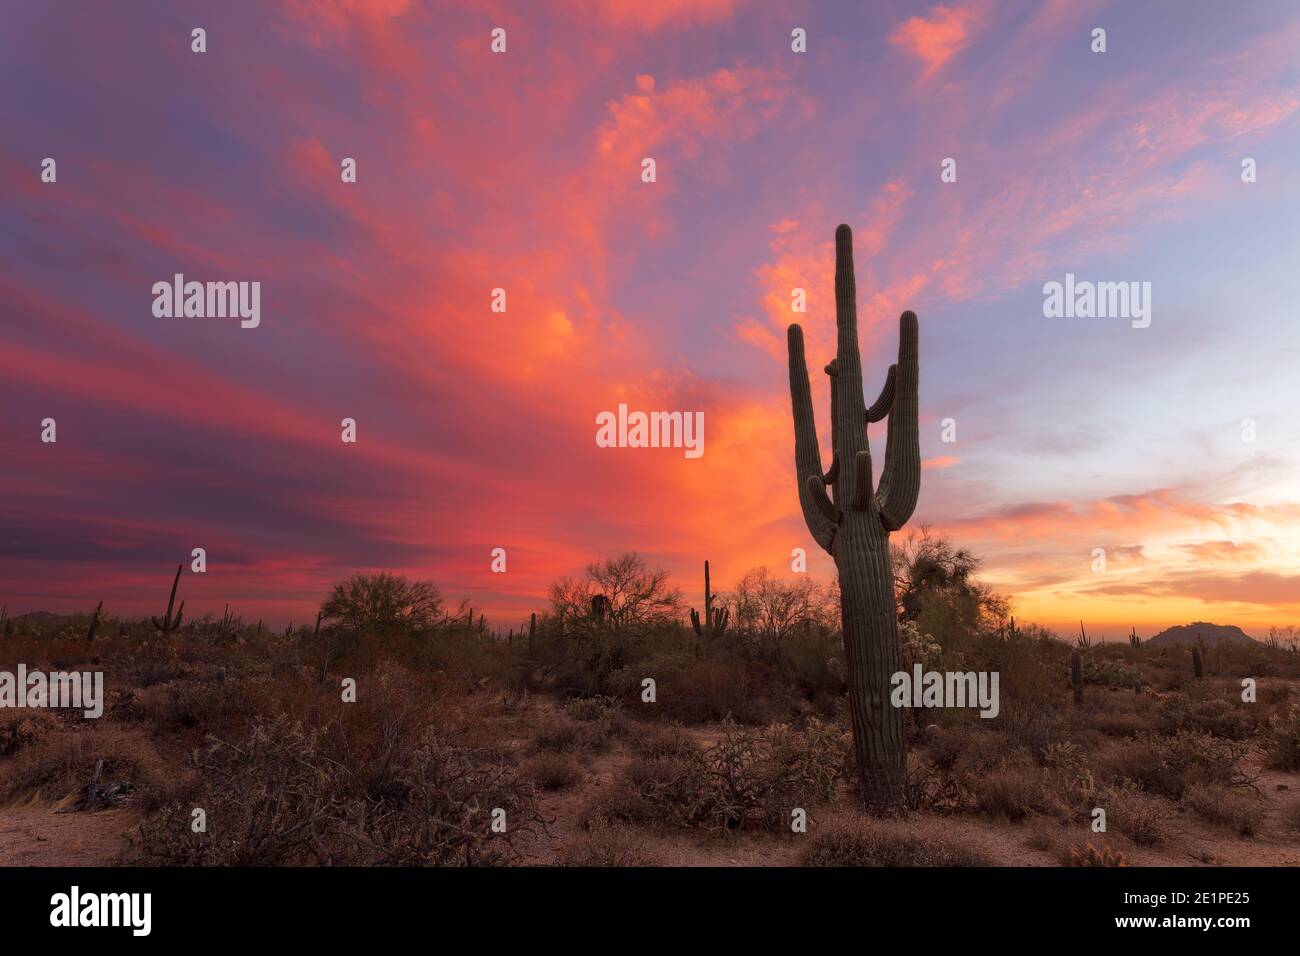 A colorful sunset sky with Saguaro Cactus over a scenic landscape in the Sonoran Desert in Phoenix, Arizona Stock Photo